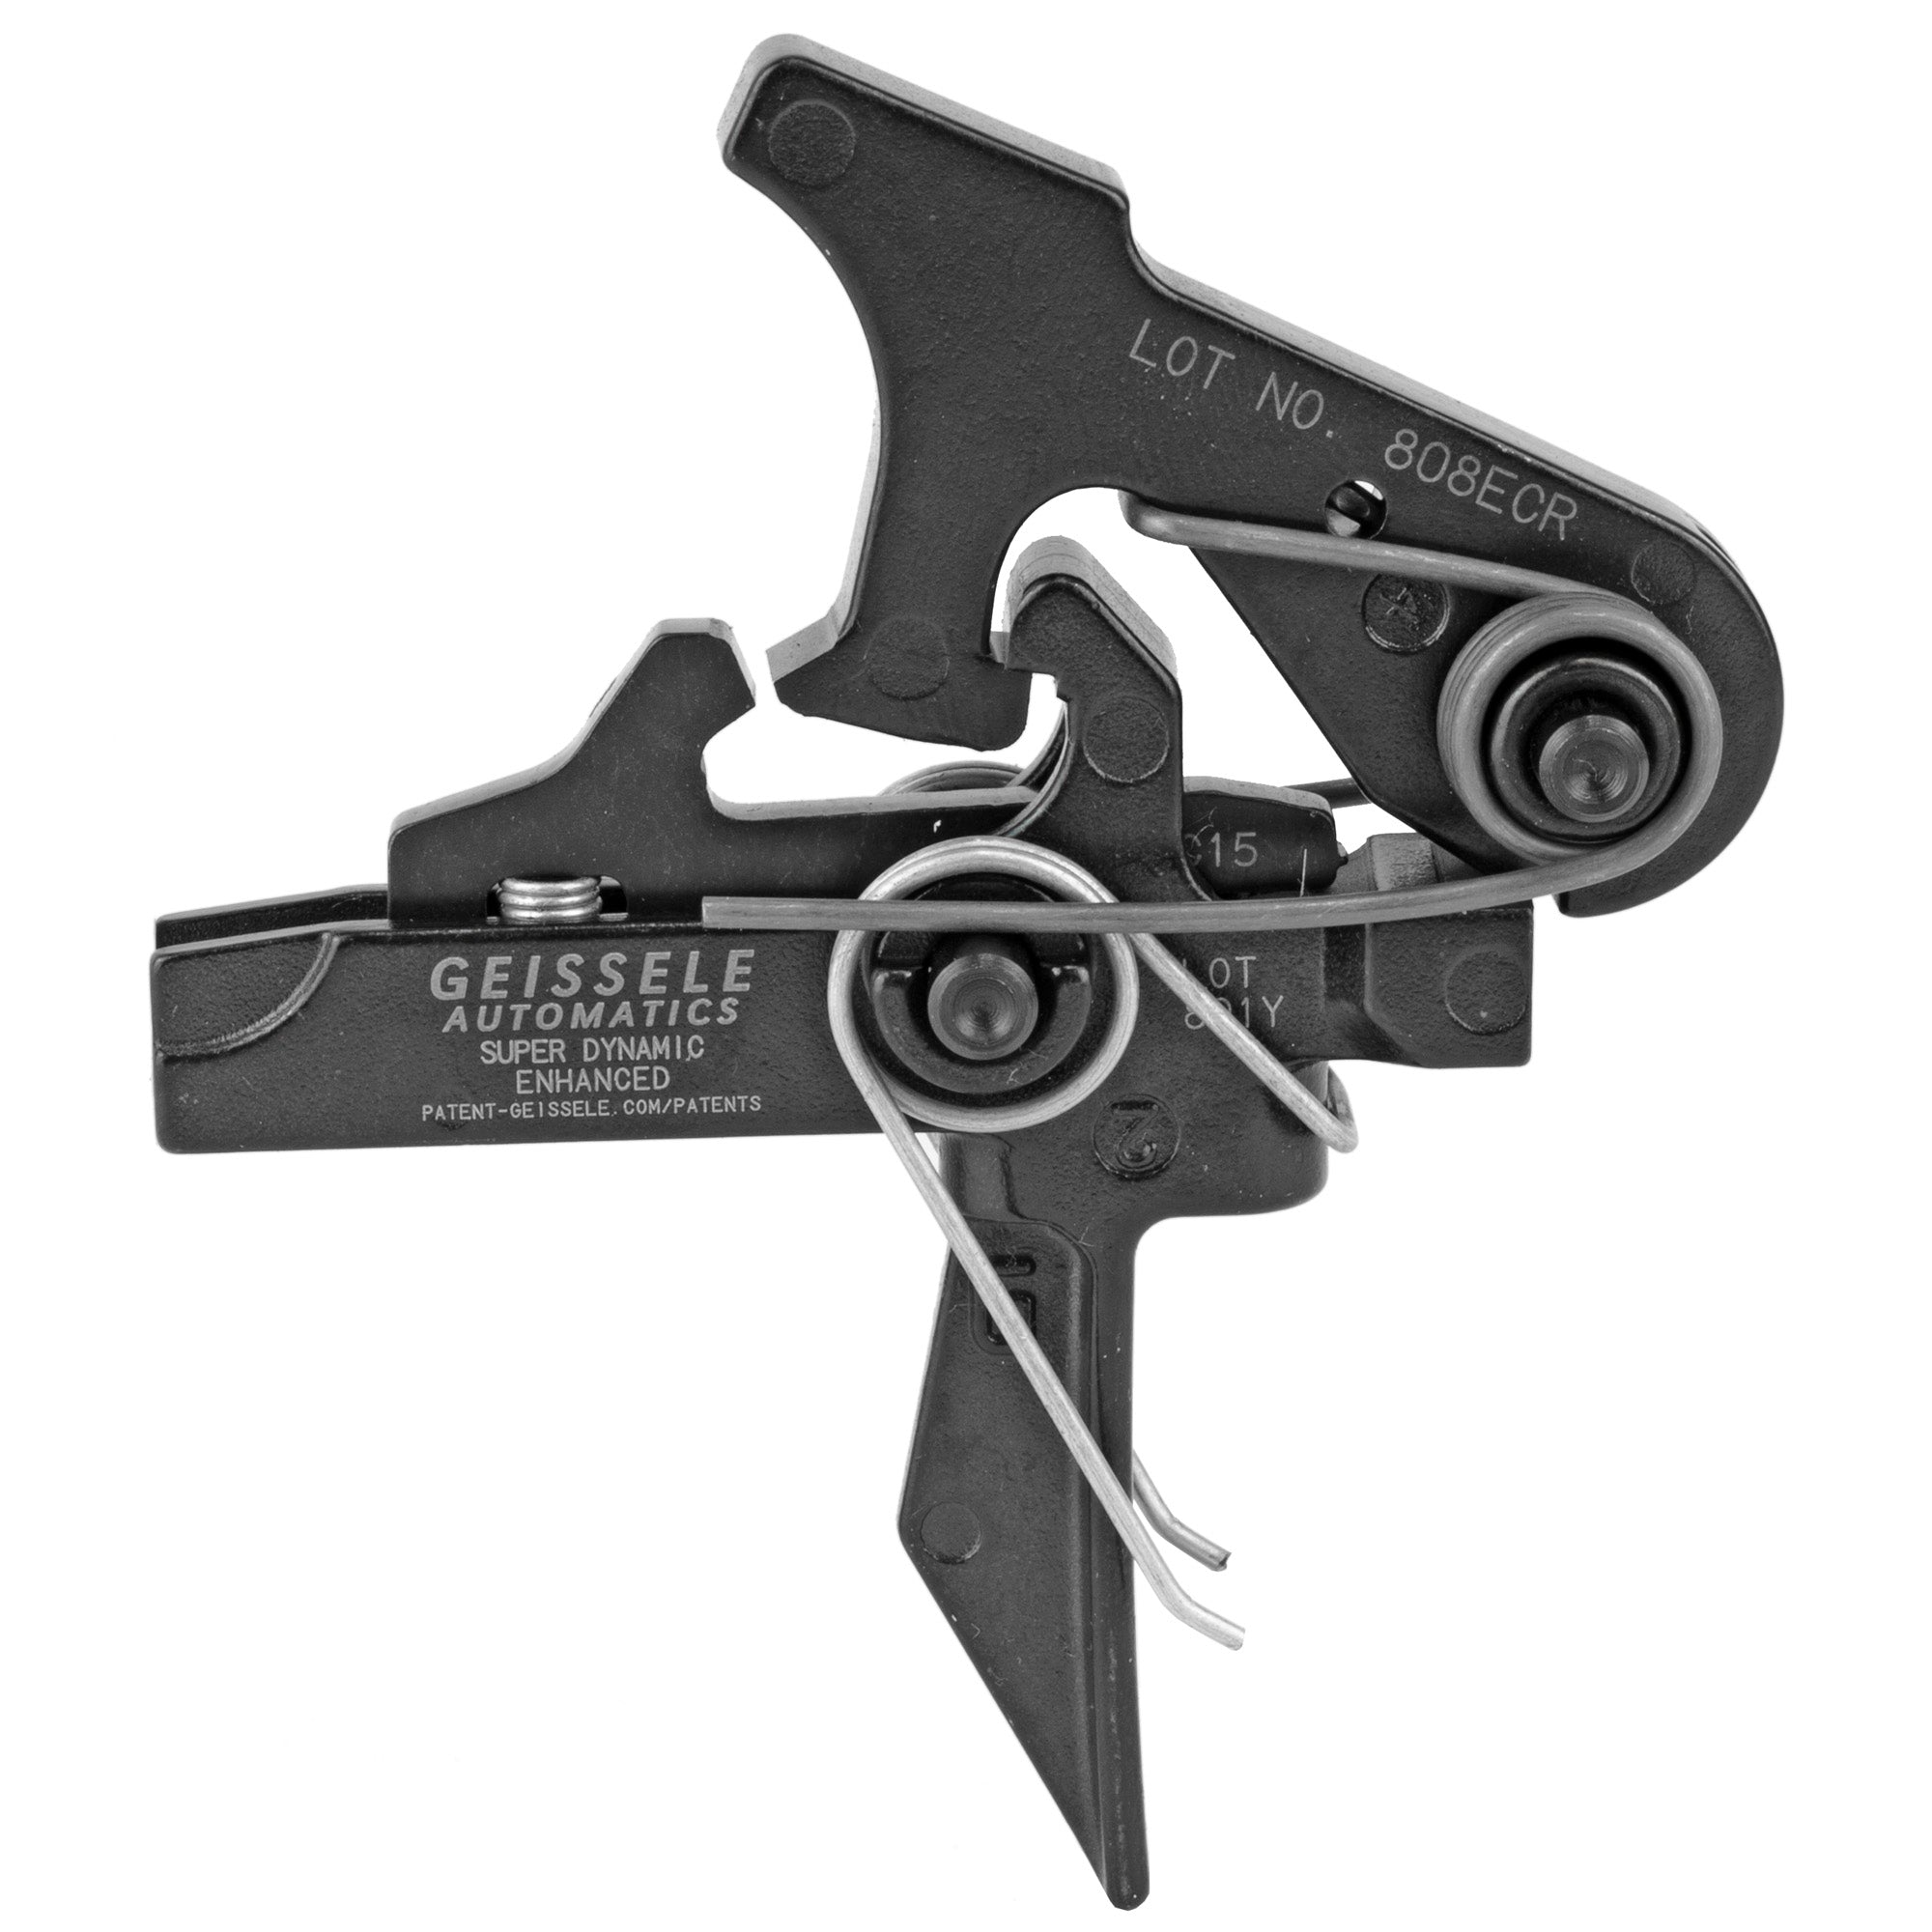 Geissele Super Dynamic Enhanced AR-15 Trigger - two-stage precision mechanism with flat bow for improved control and speed.